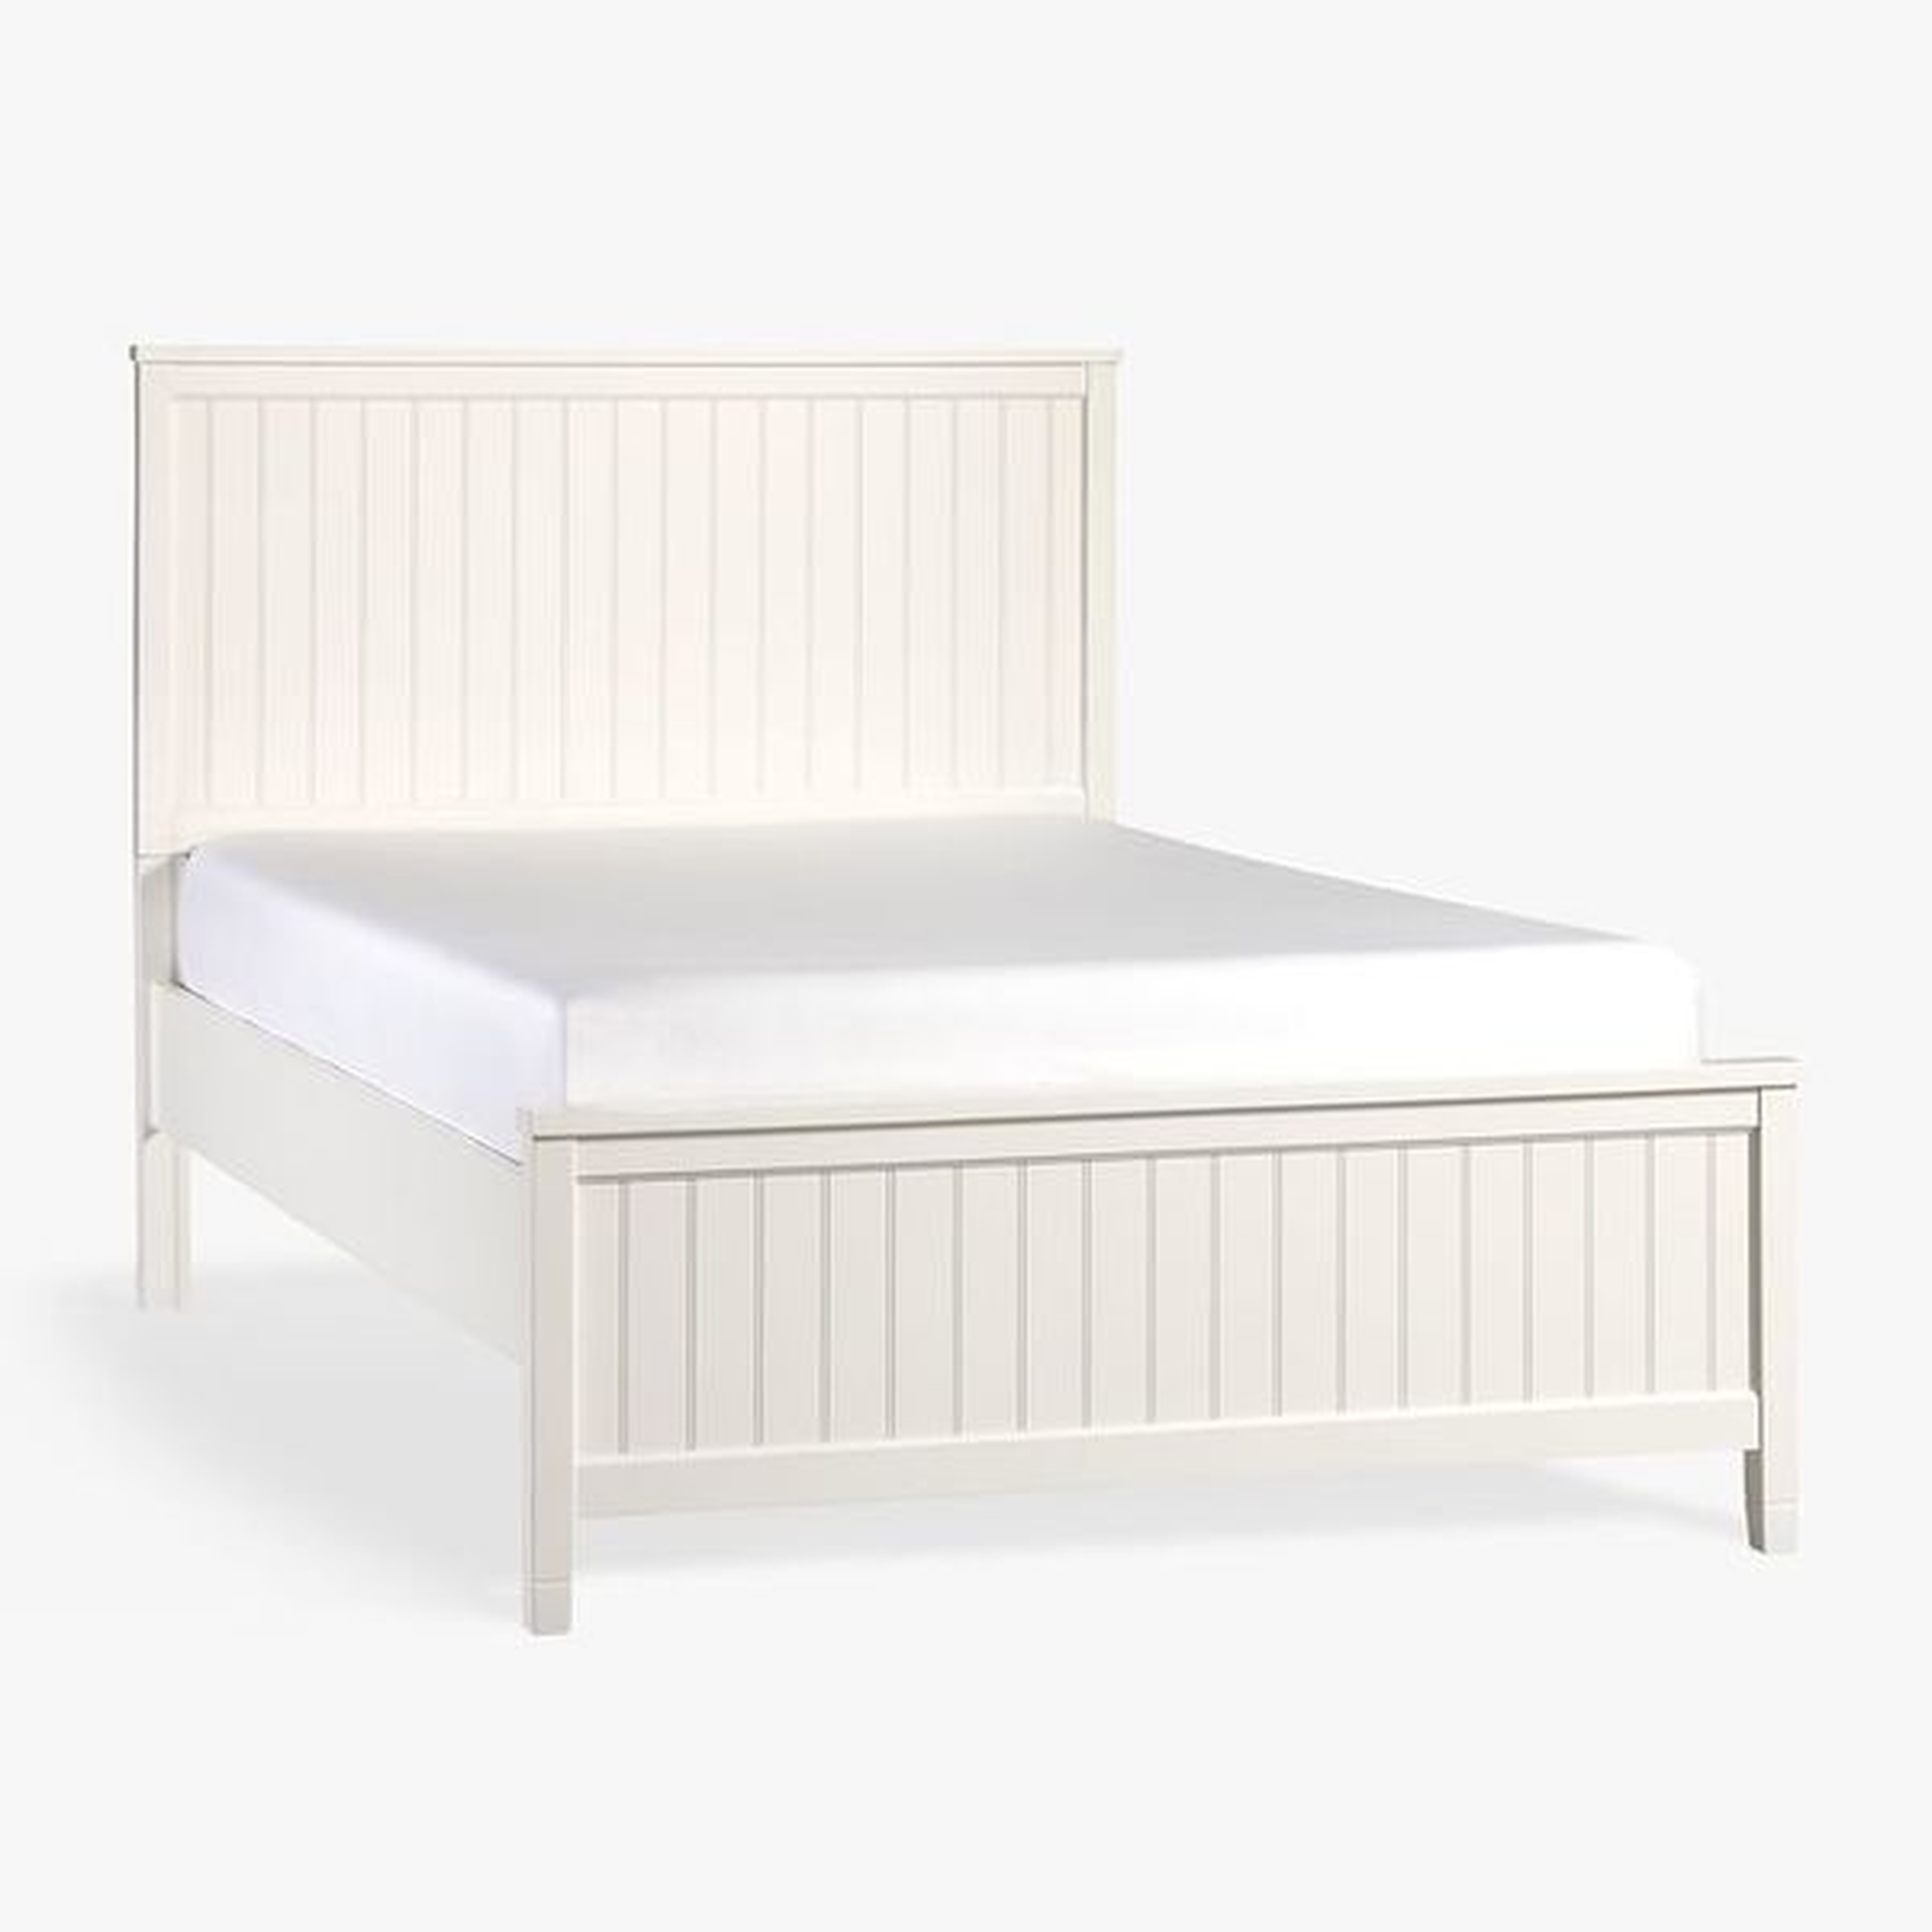 Beadboard Basic Bed, Queen, Simply White, In-Home - Pottery Barn Teen